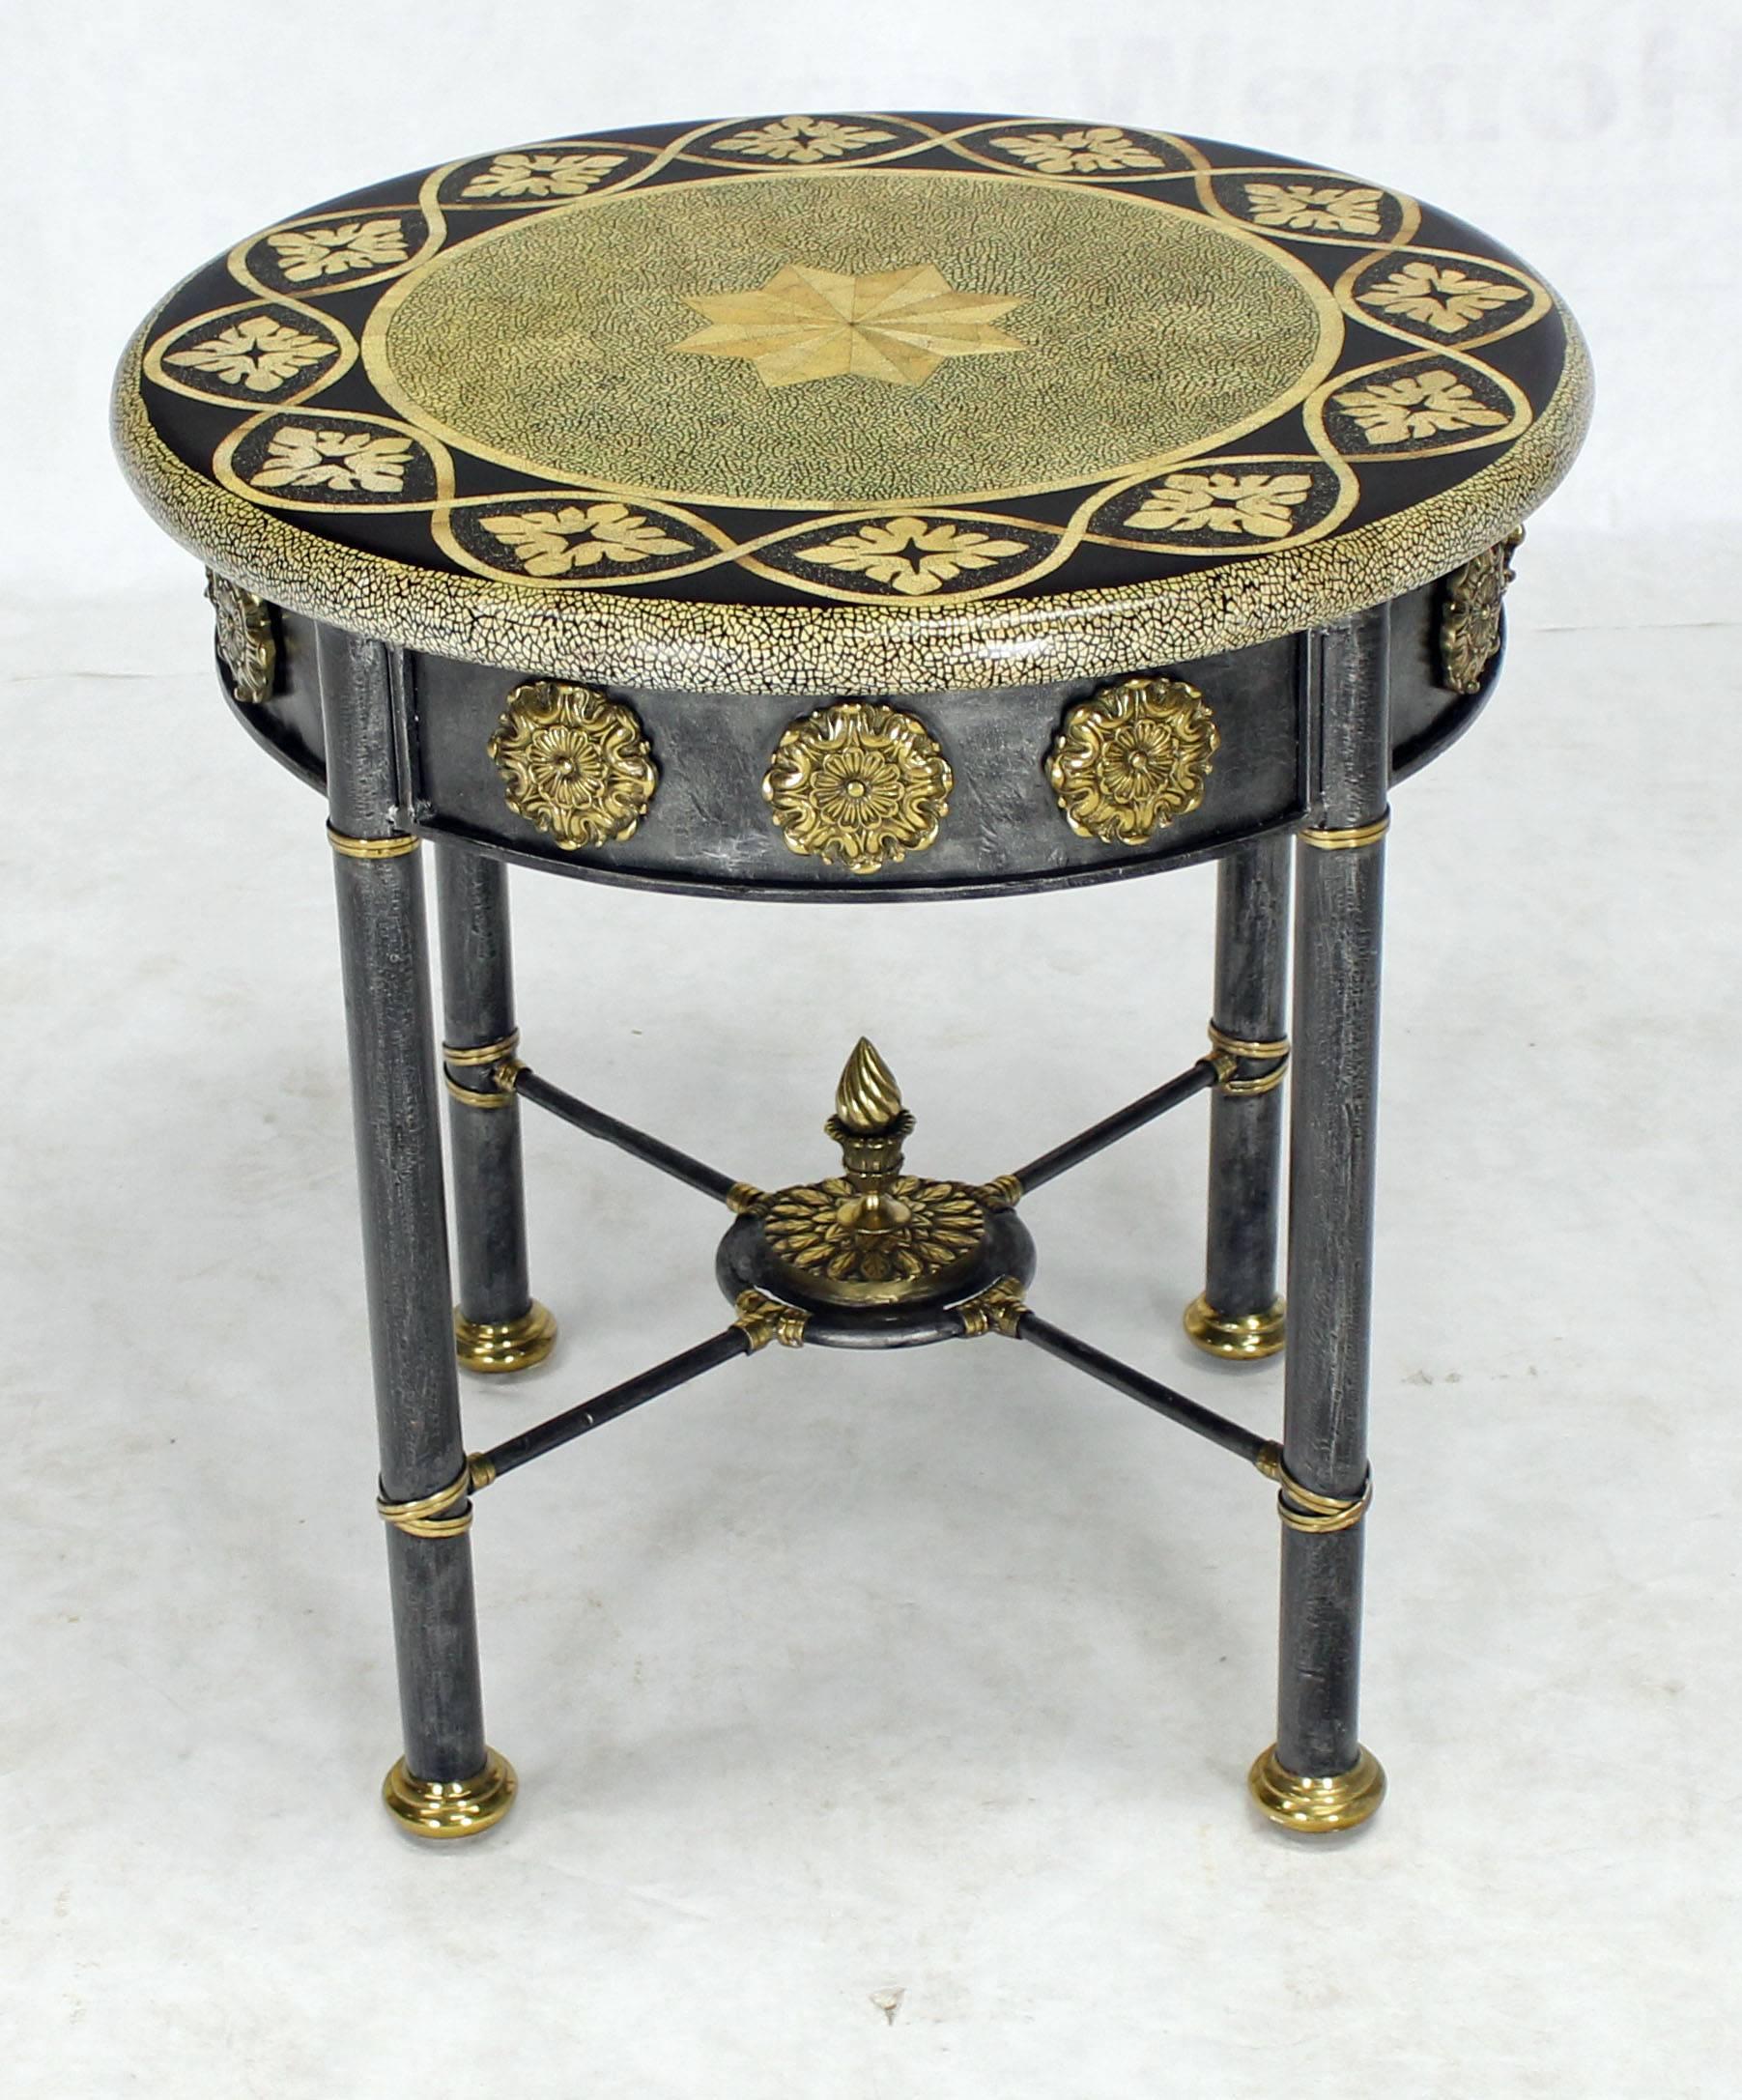 Philippine Round Faux Egg Shell Decorated Bronze Ormolu Decorated Round Gueridon Table For Sale